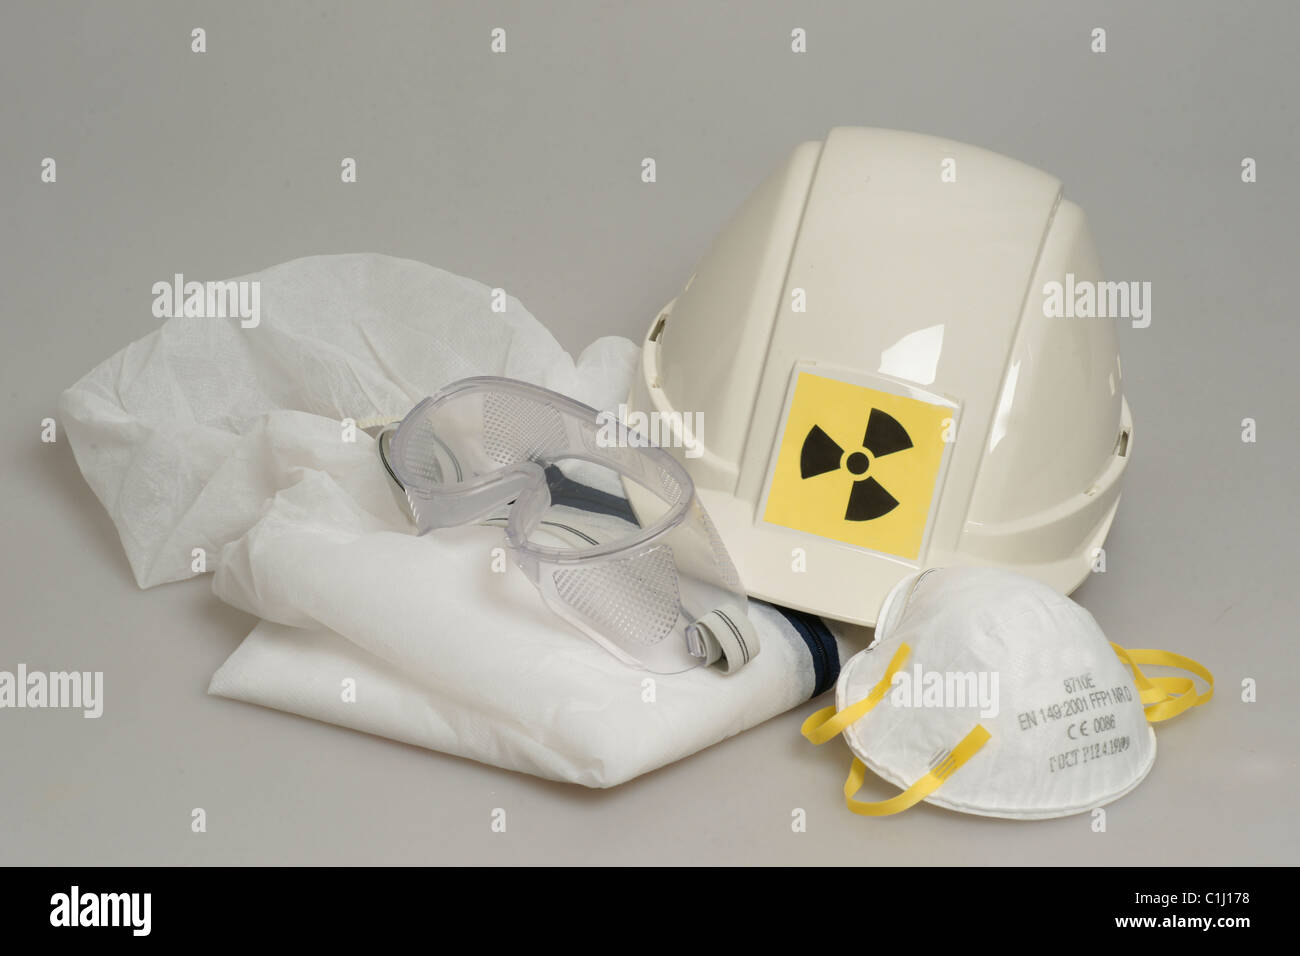 protection from nuclear power Stock Photo